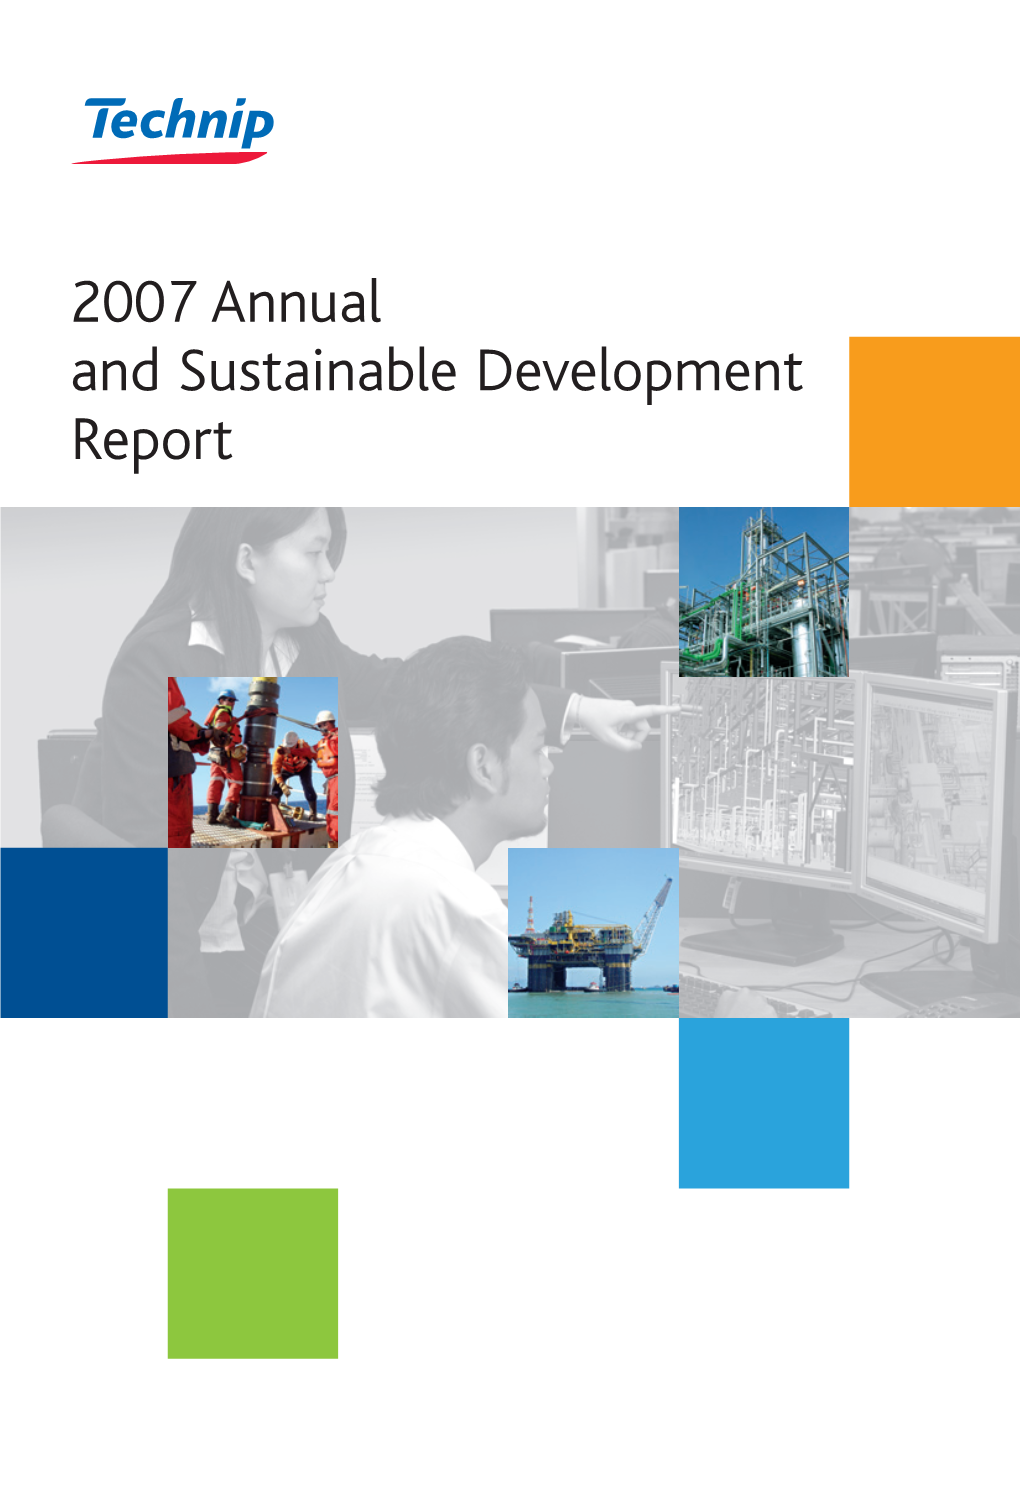 2007 Annual and Sustainable Development Report - Technip 2